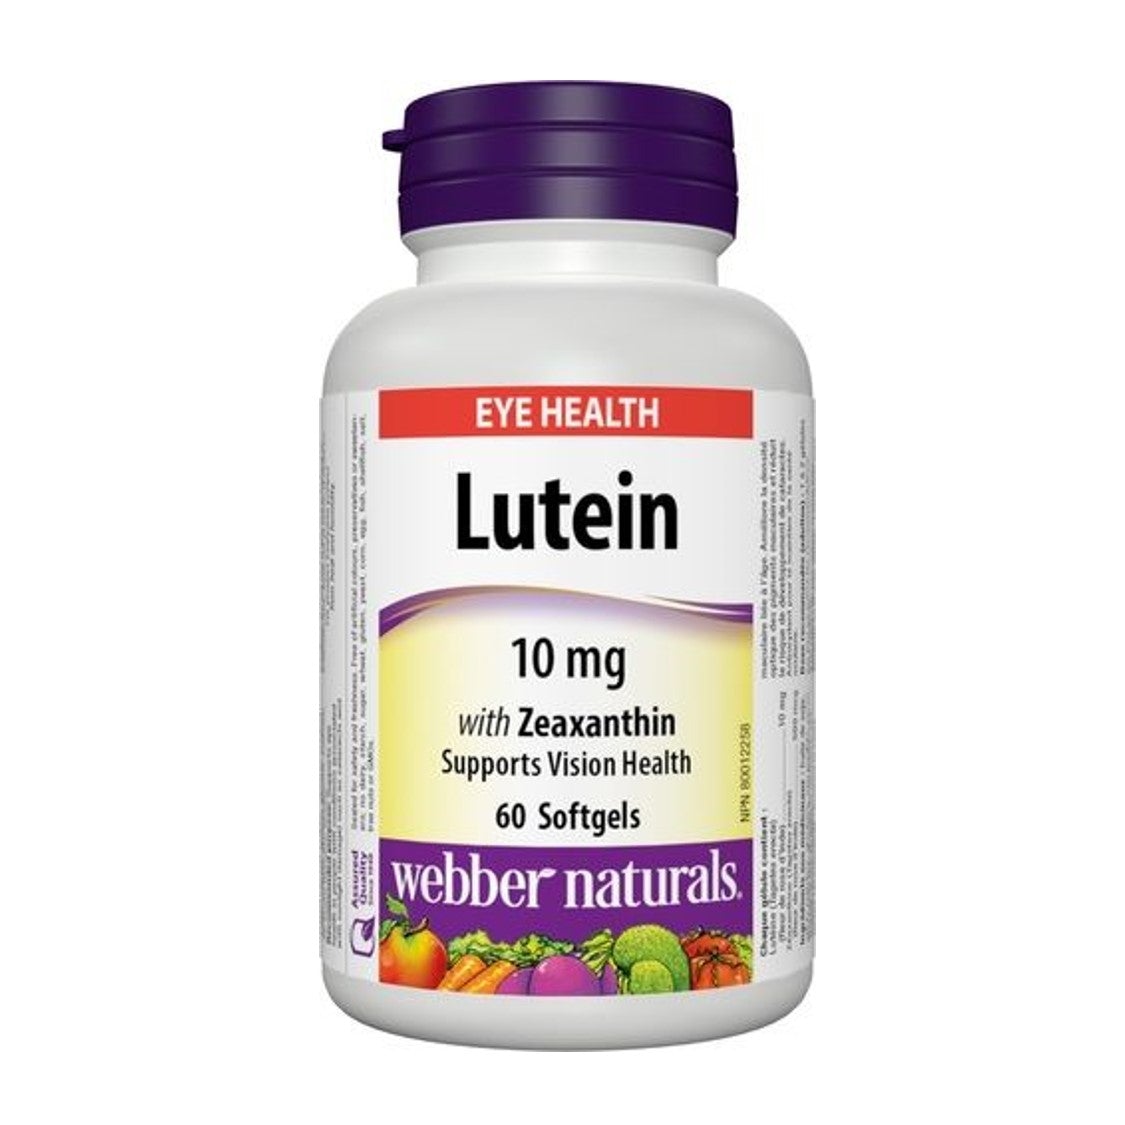 webber-naturals-lutein-with-zeaxanthin-10mg-60softgels